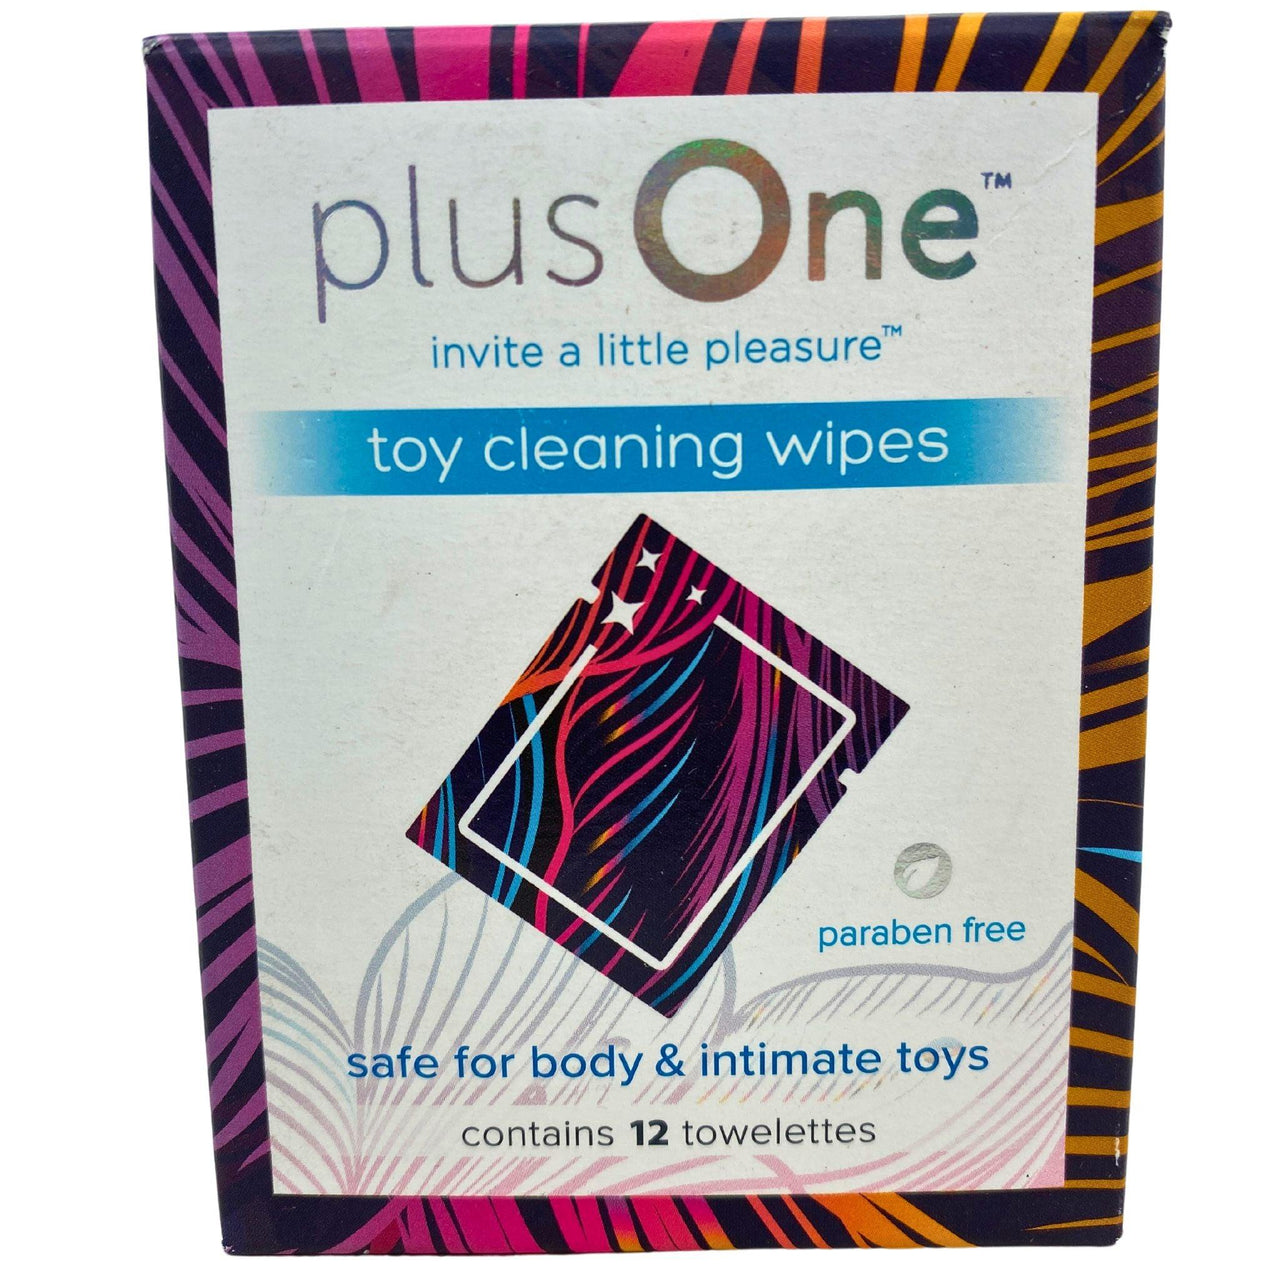 Plus One Toy Cleaning Wipes Paraben Free Safe For Body & Intimate Toys (60 Pcs Lot) - Discount Wholesalers Inc